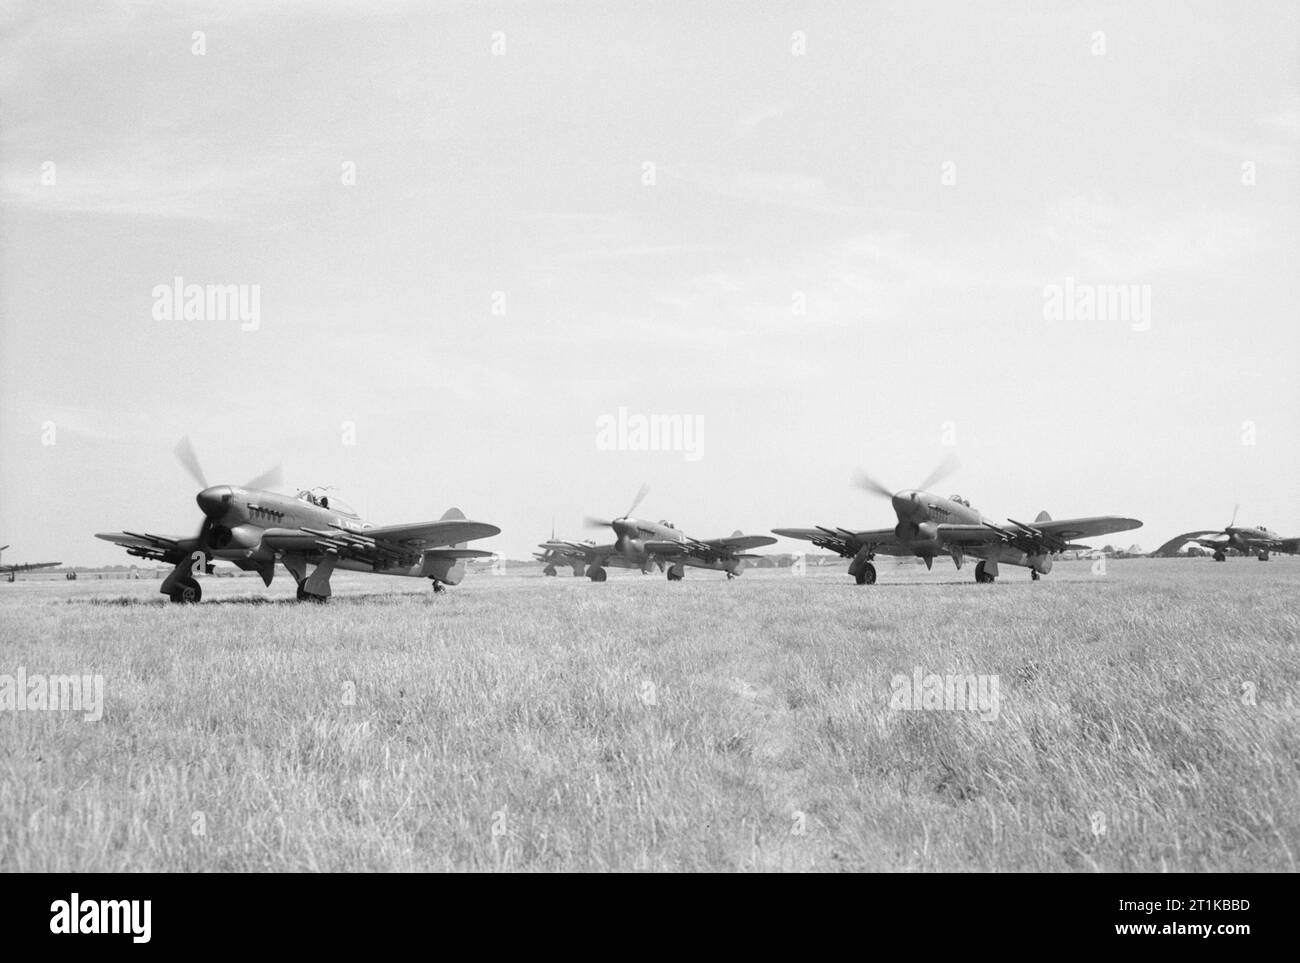 Royal Air Force- 2nd Tactical Air Force, 1943-1945. Hawker Typhoon Mark IBs of No, 164 Squadron RAF, ready to take off from Thorney Island, Hampshire, to attack radar sites on the Normandy coast. Stock Photo